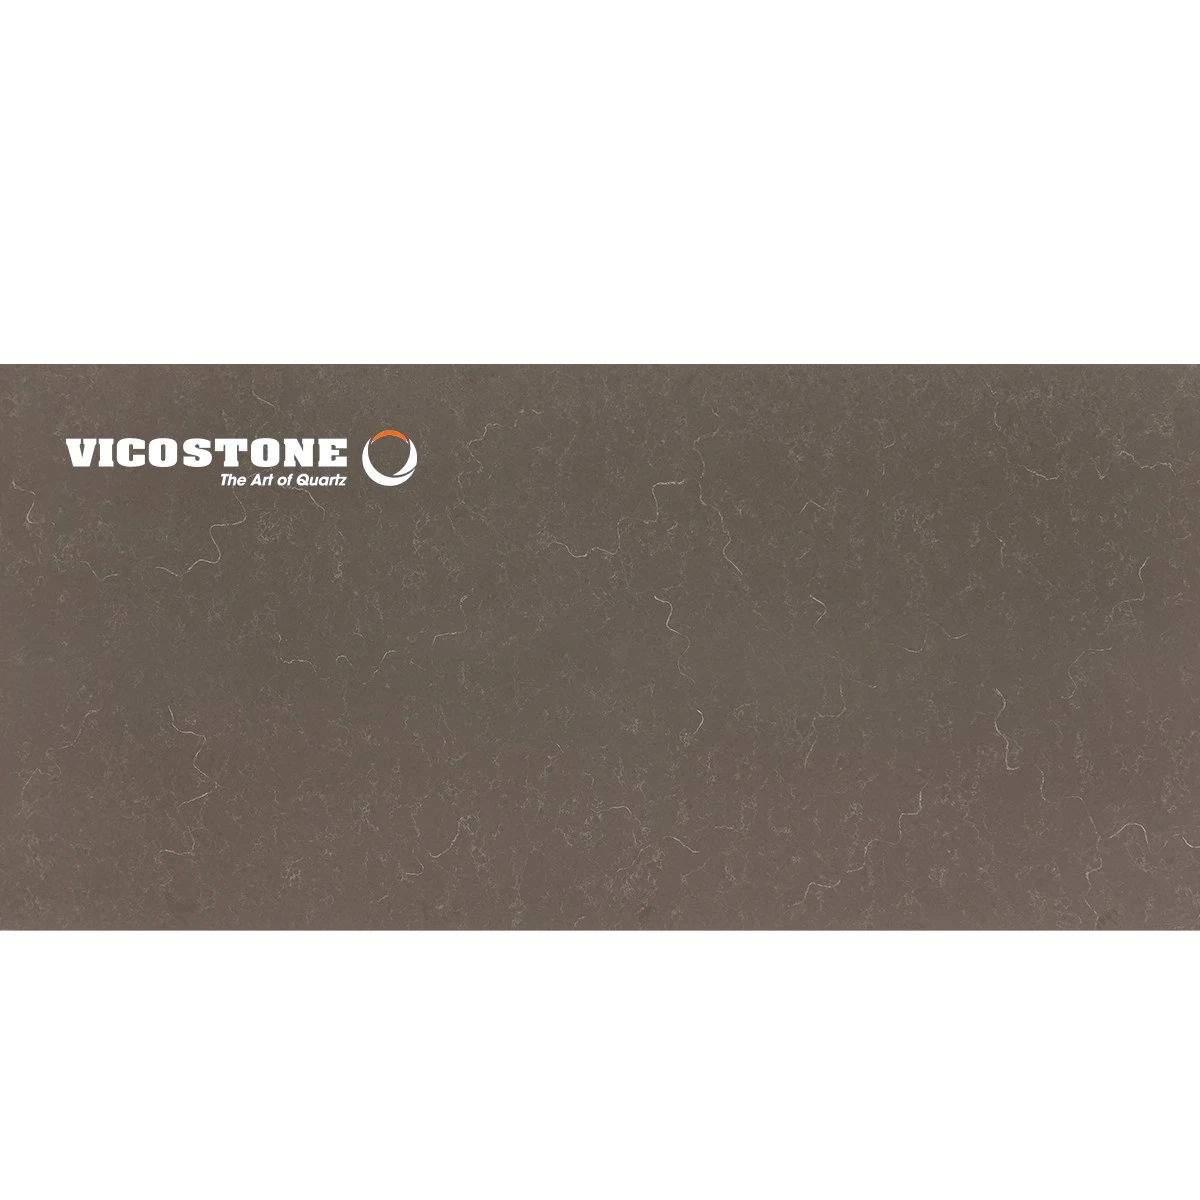 Two thin vein layers spread over a brown and gray background Engineered Quartz Stone - Vicostone BQ8810 Imperio